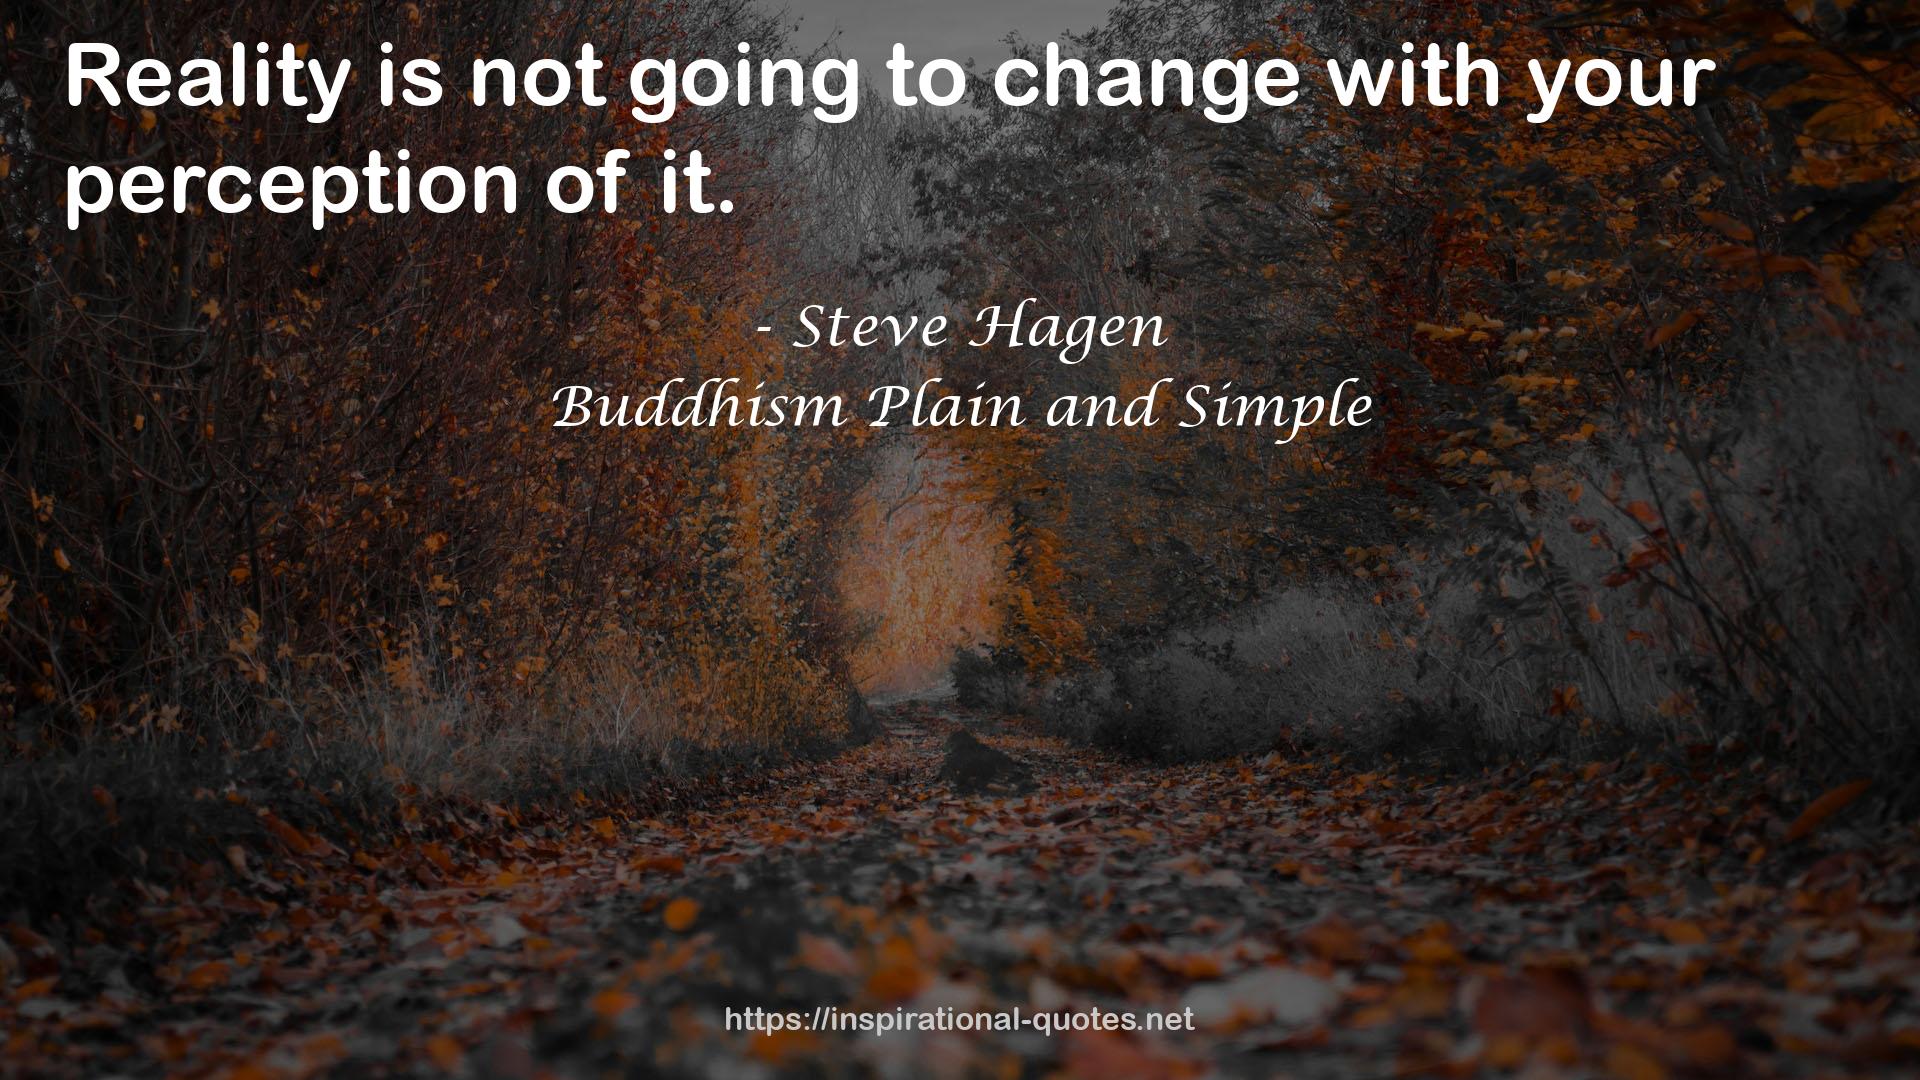 Buddhism Plain and Simple QUOTES